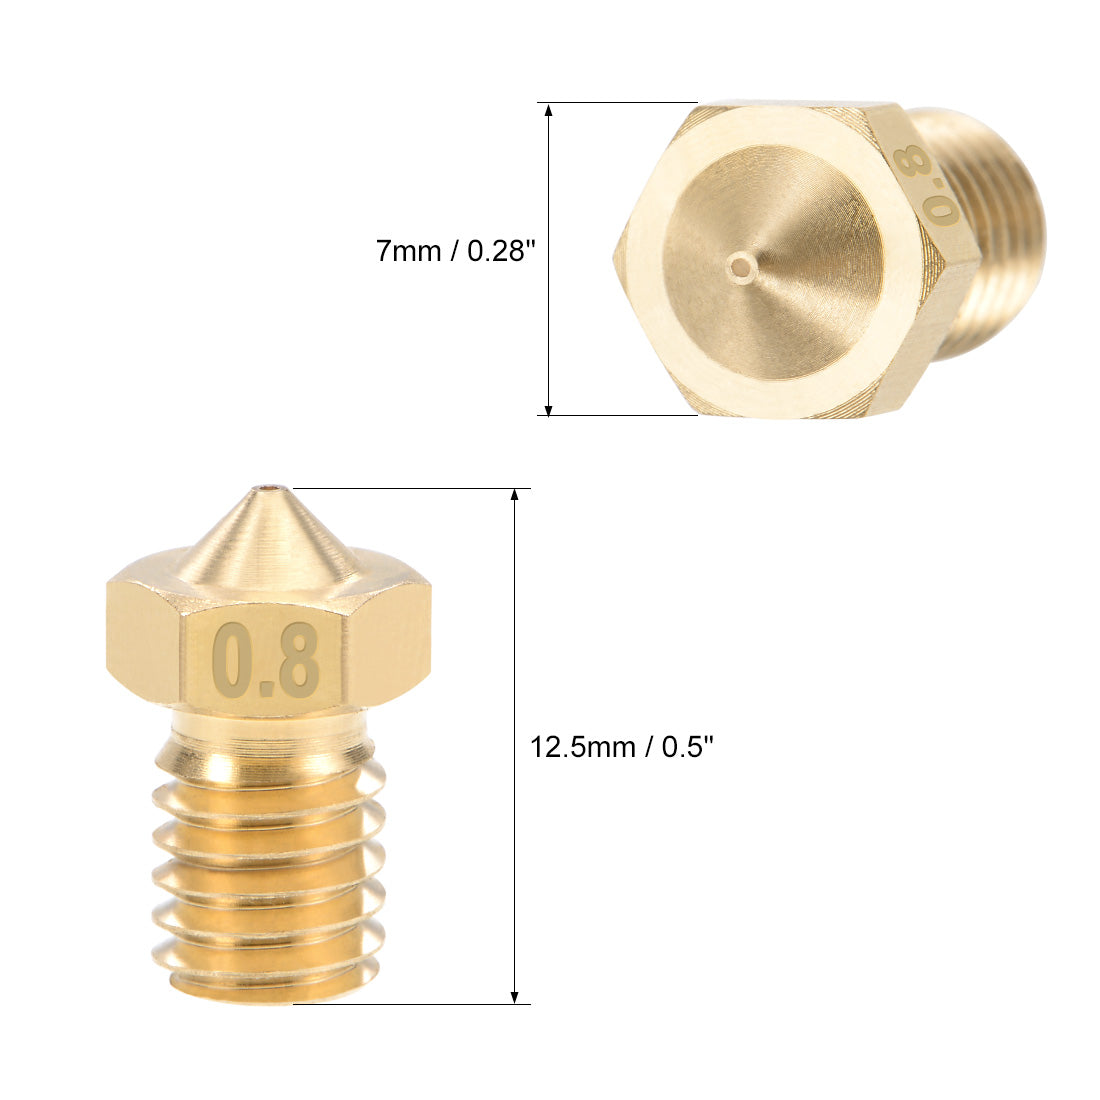 uxcell Uxcell 0.8mm 3D Printer Nozzle Head M6 for V5 V6 1.75mm Extruder Print, Brass 2pcs